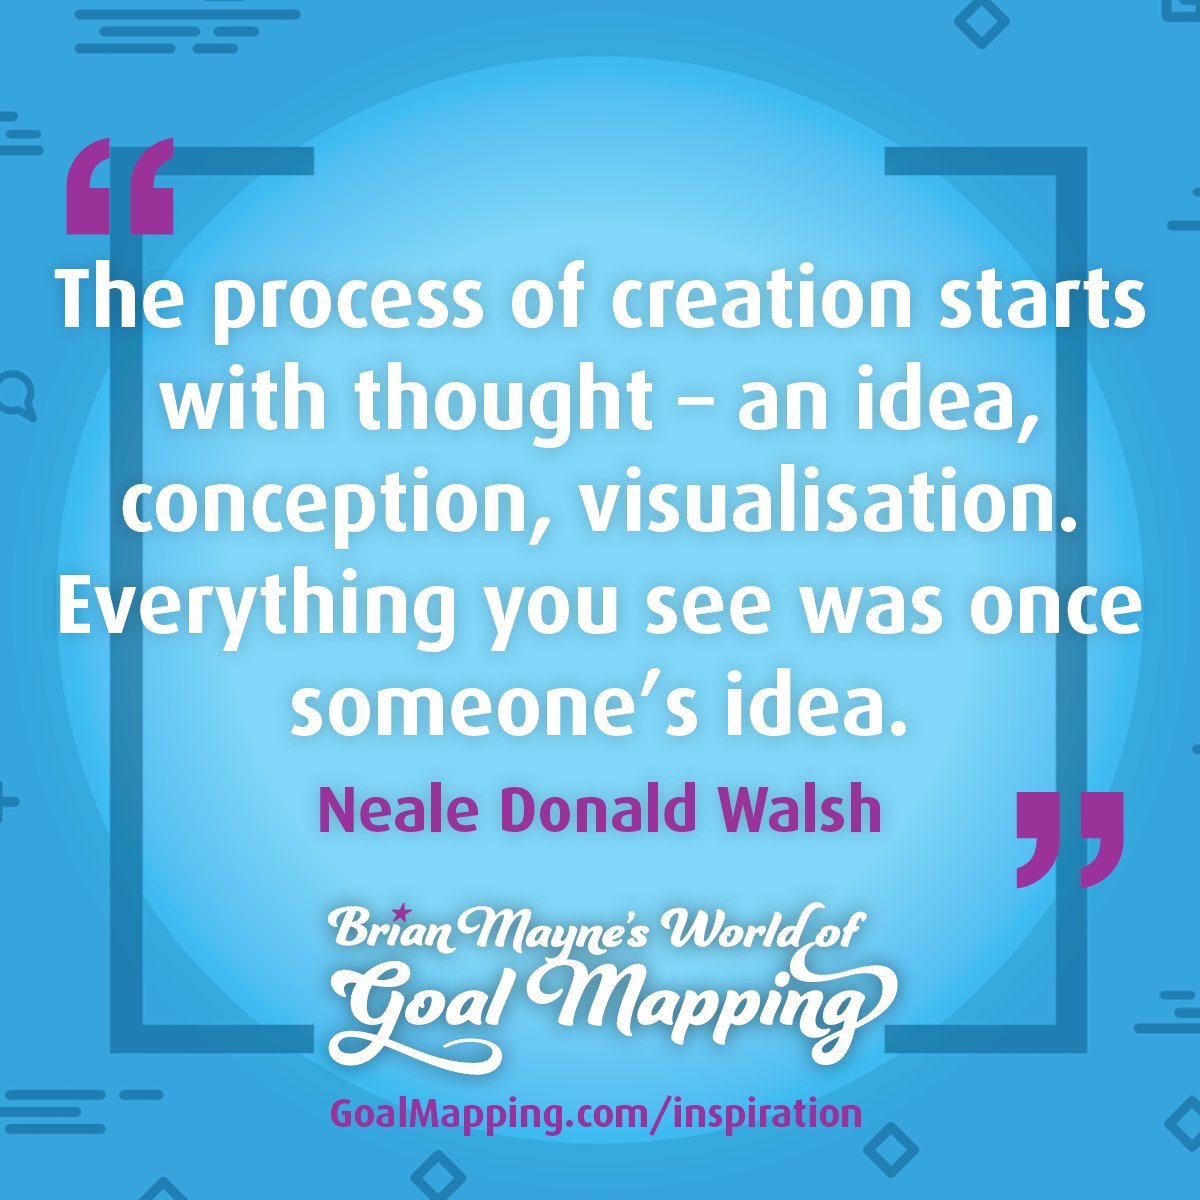 "The process of creation starts with thought - an idea, conception, visualisation. Everything you see was once someone’s idea. Nothing exists in your world that did not first exist as pure thought." Neale Donald Walsh